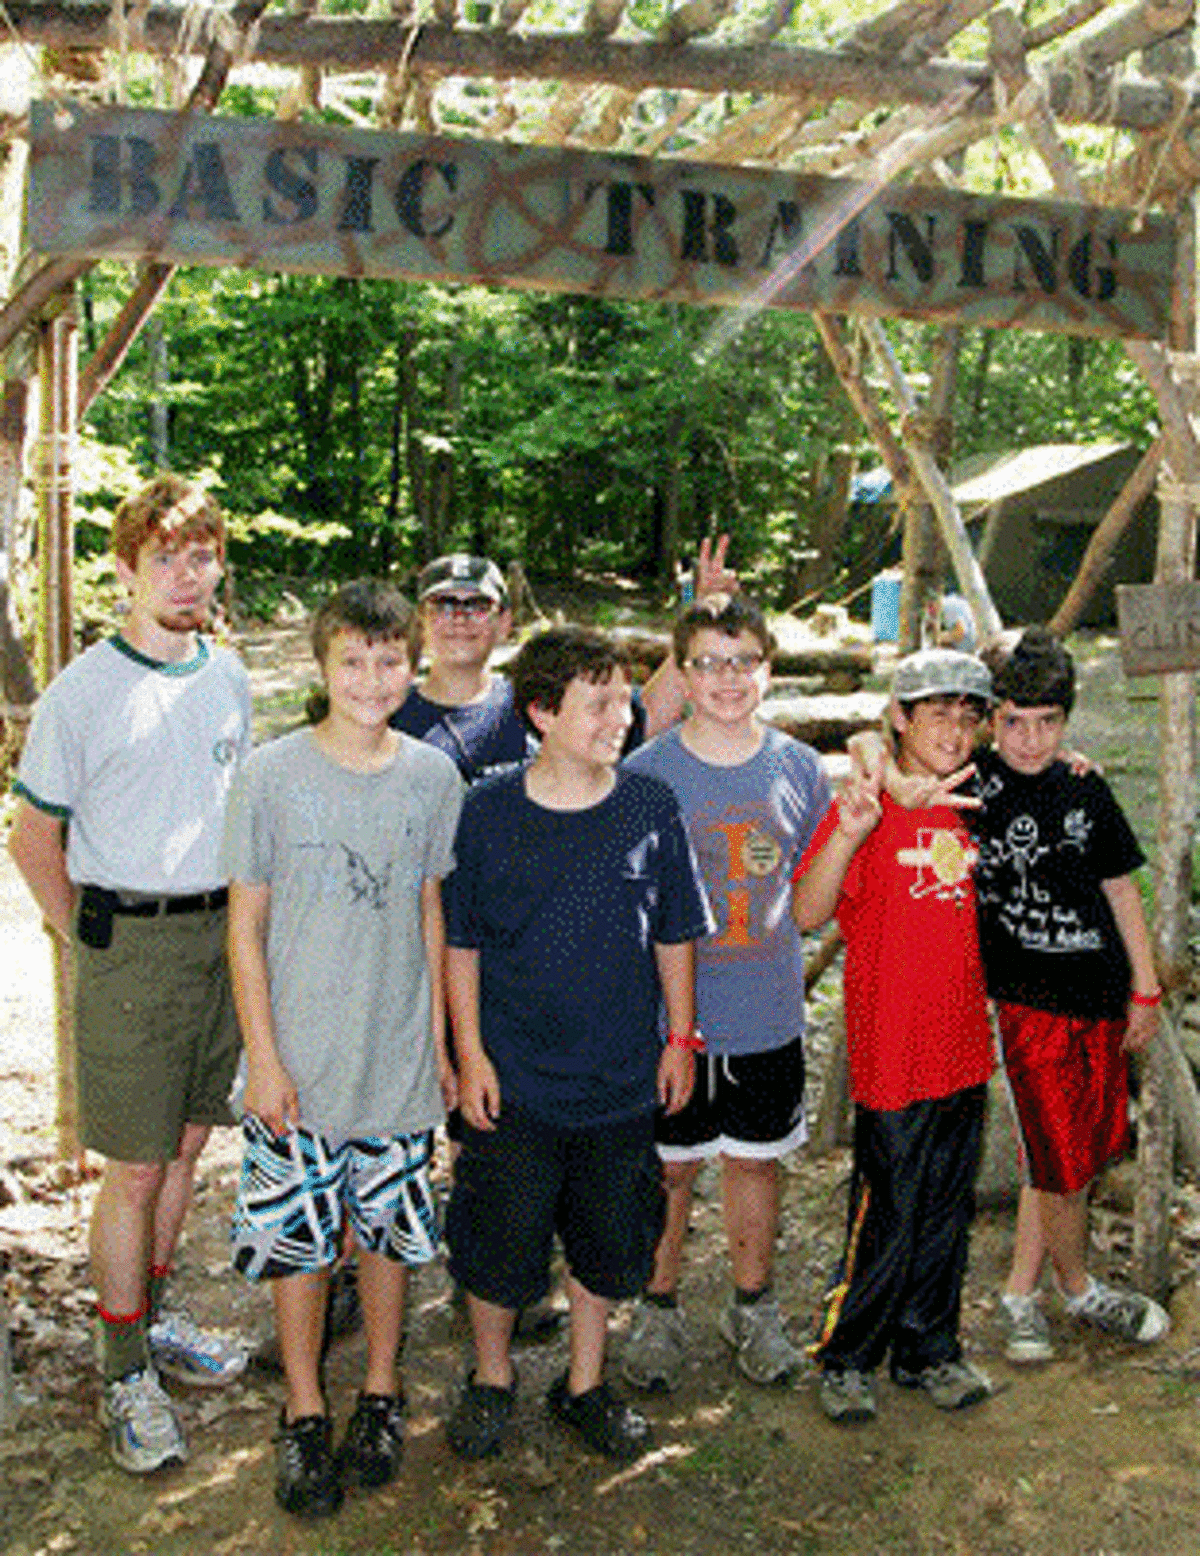 Kyle Casiglio, left, with some campers at the local Boy Scout council’s Edmund D. Strang Scout Reservation in upstate Connecticut.